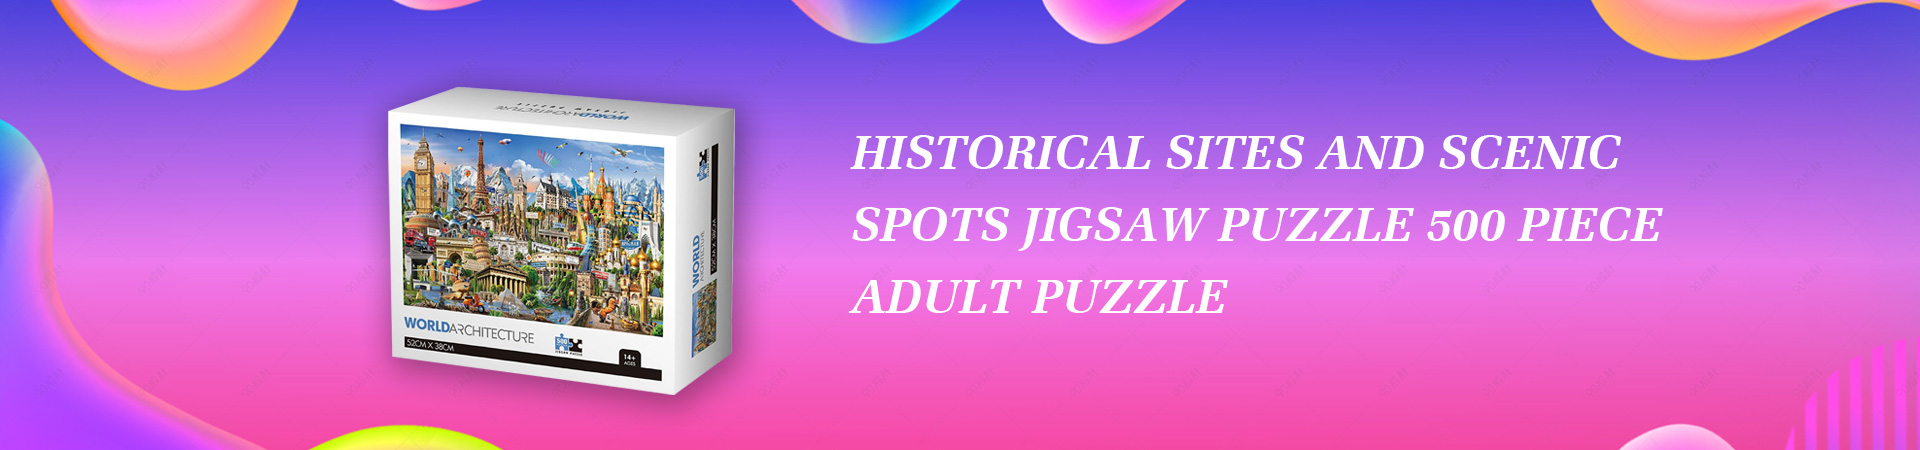 Adults Puzzles